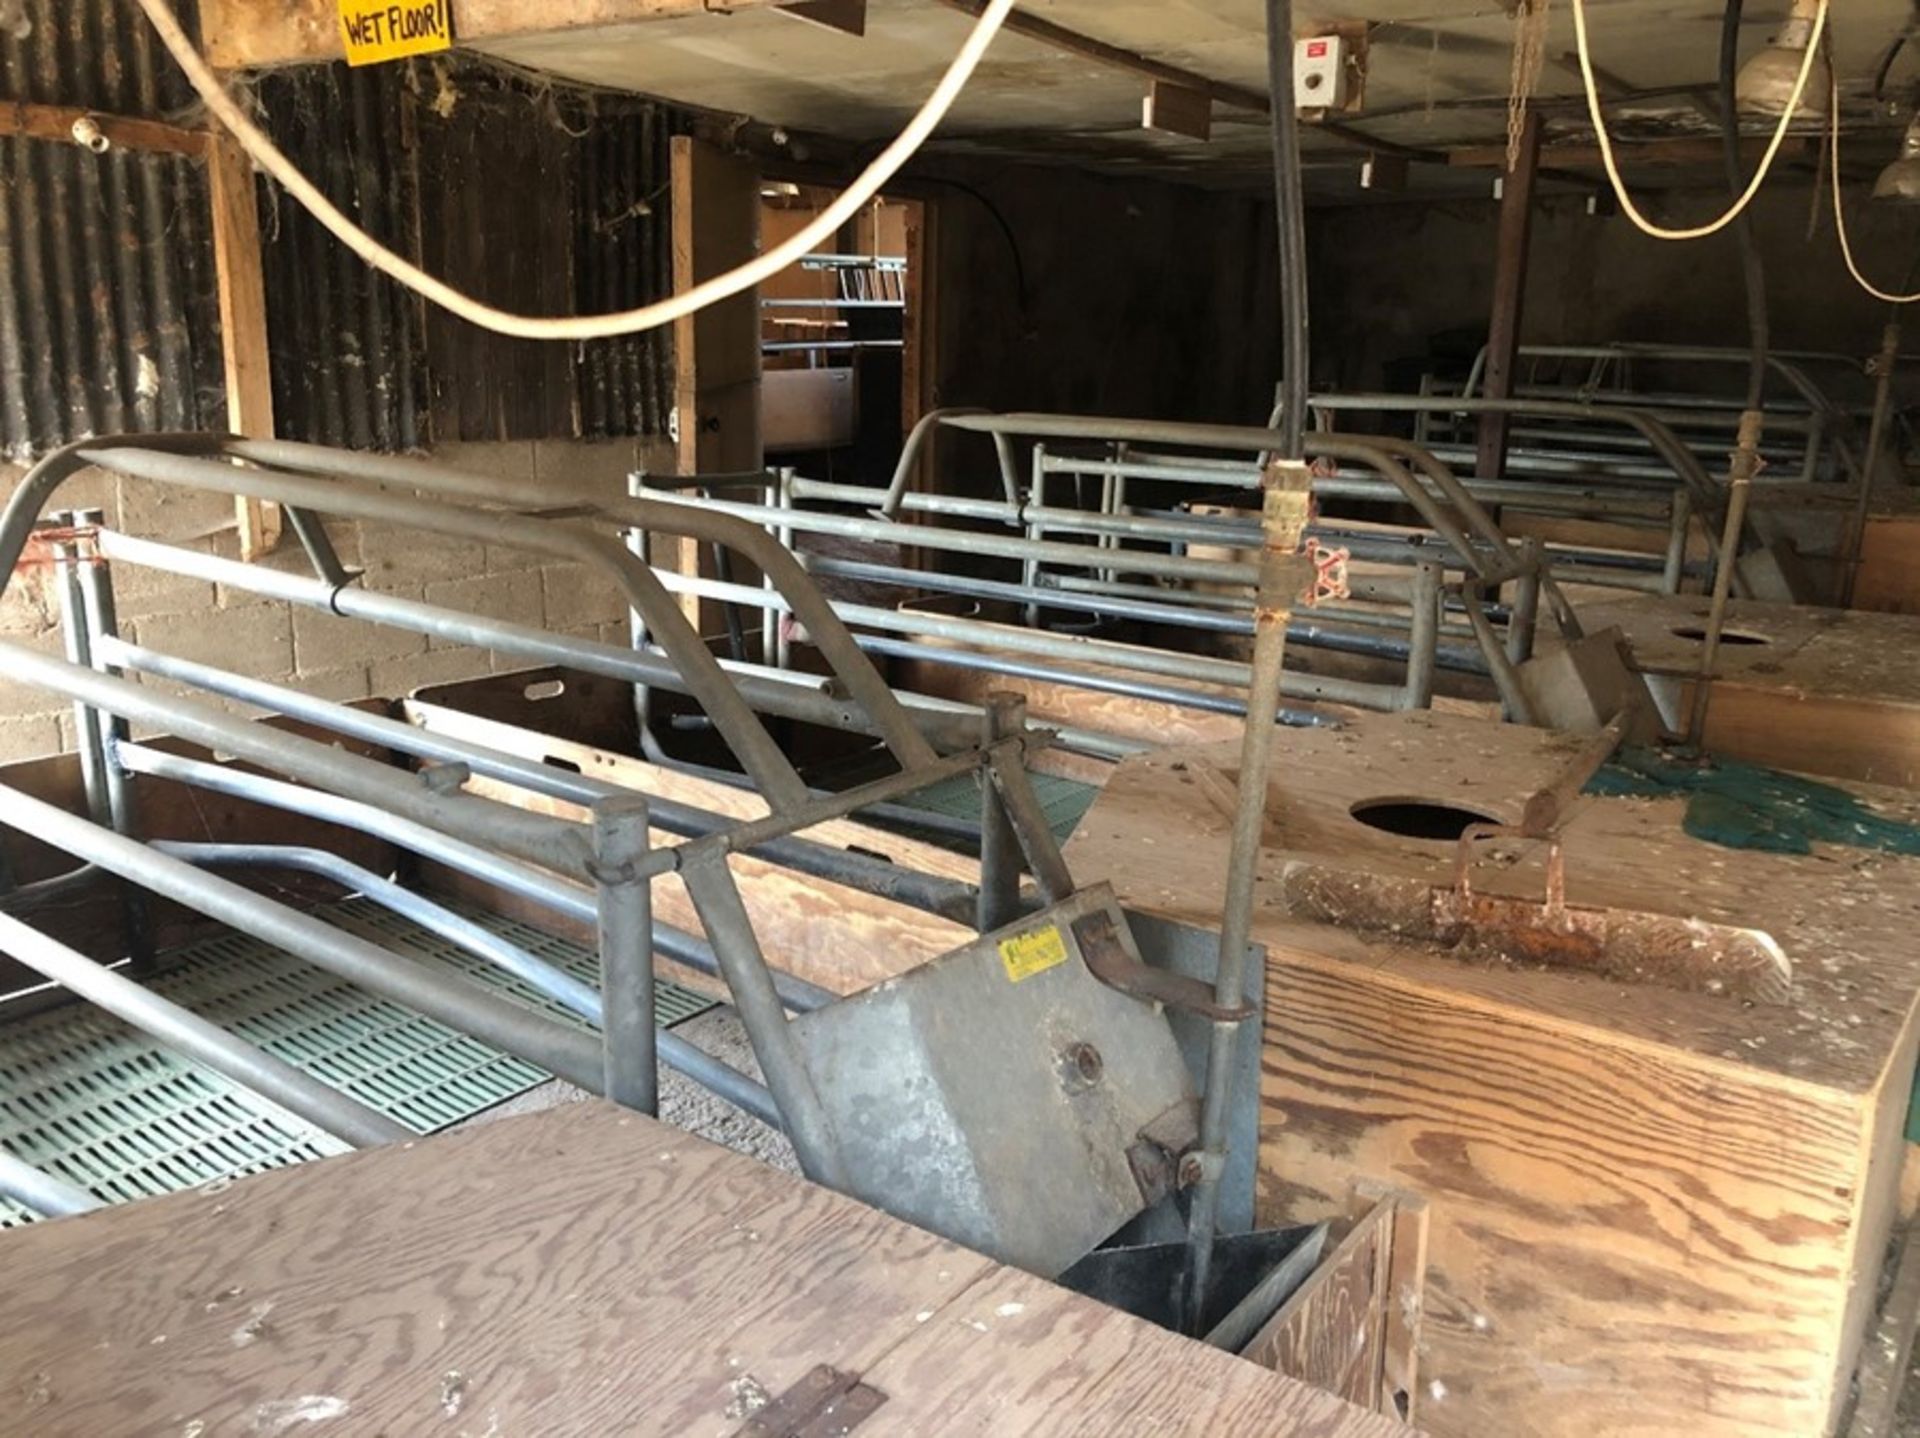 6 farrowing crates, cast iron slatted floors, weaner boxes (sold in situ, buyer to dismantle)